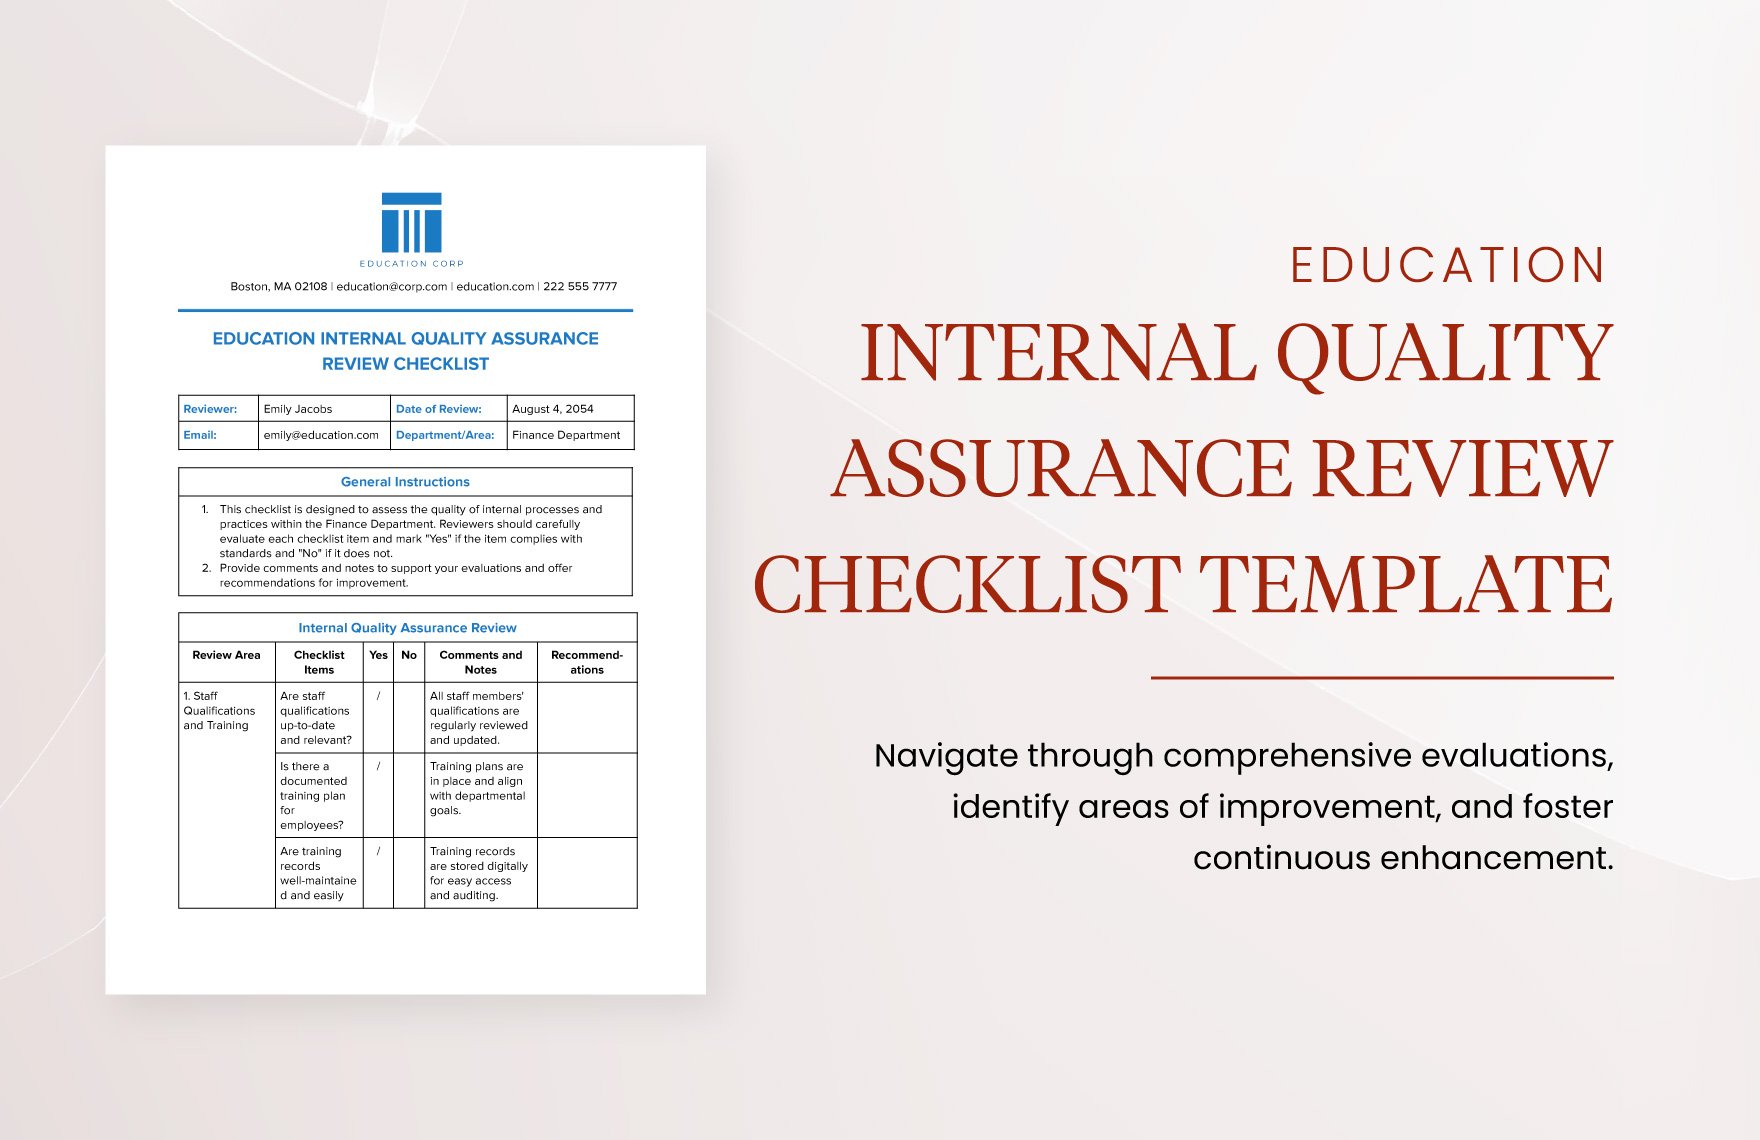 Education Internal Quality Assurance Review Checklist Template in Word, Google Docs, PDF